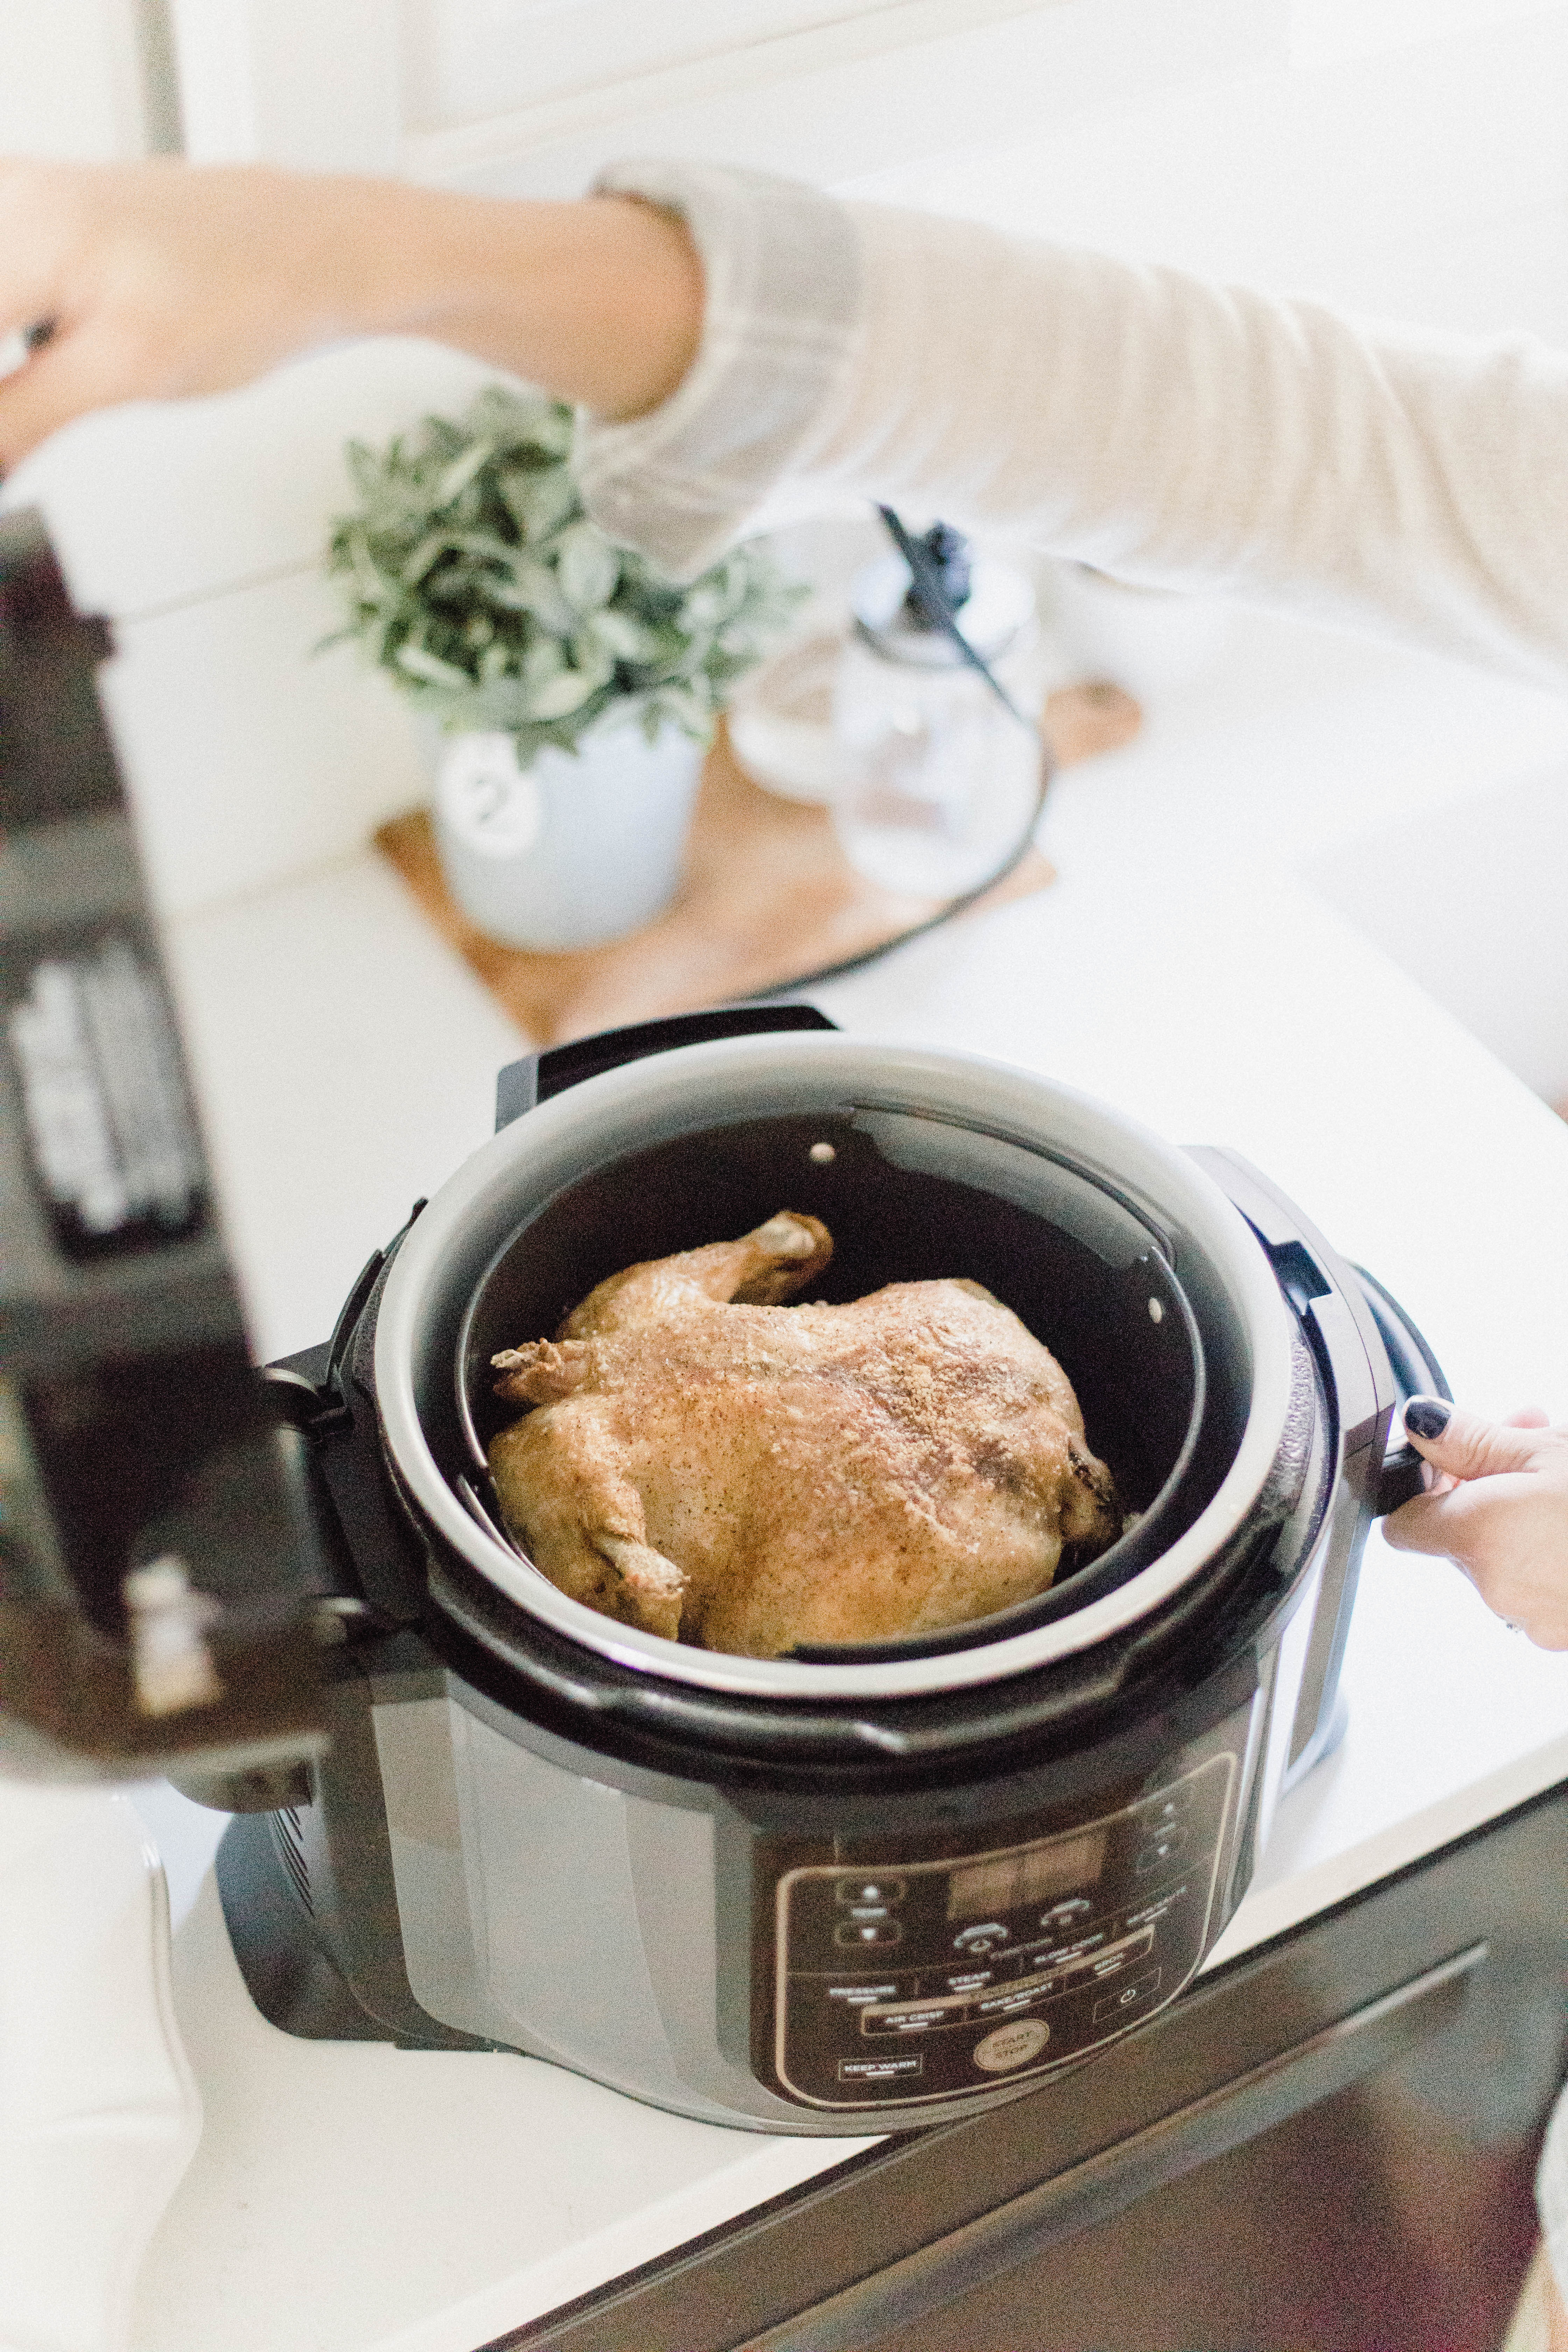 Connecticut life and style blogger Laure McBride shares a Ninja Foodi review, showcasing the pressure cooker and air fryer tecnhnology Ninja offers with their new and innovative product.